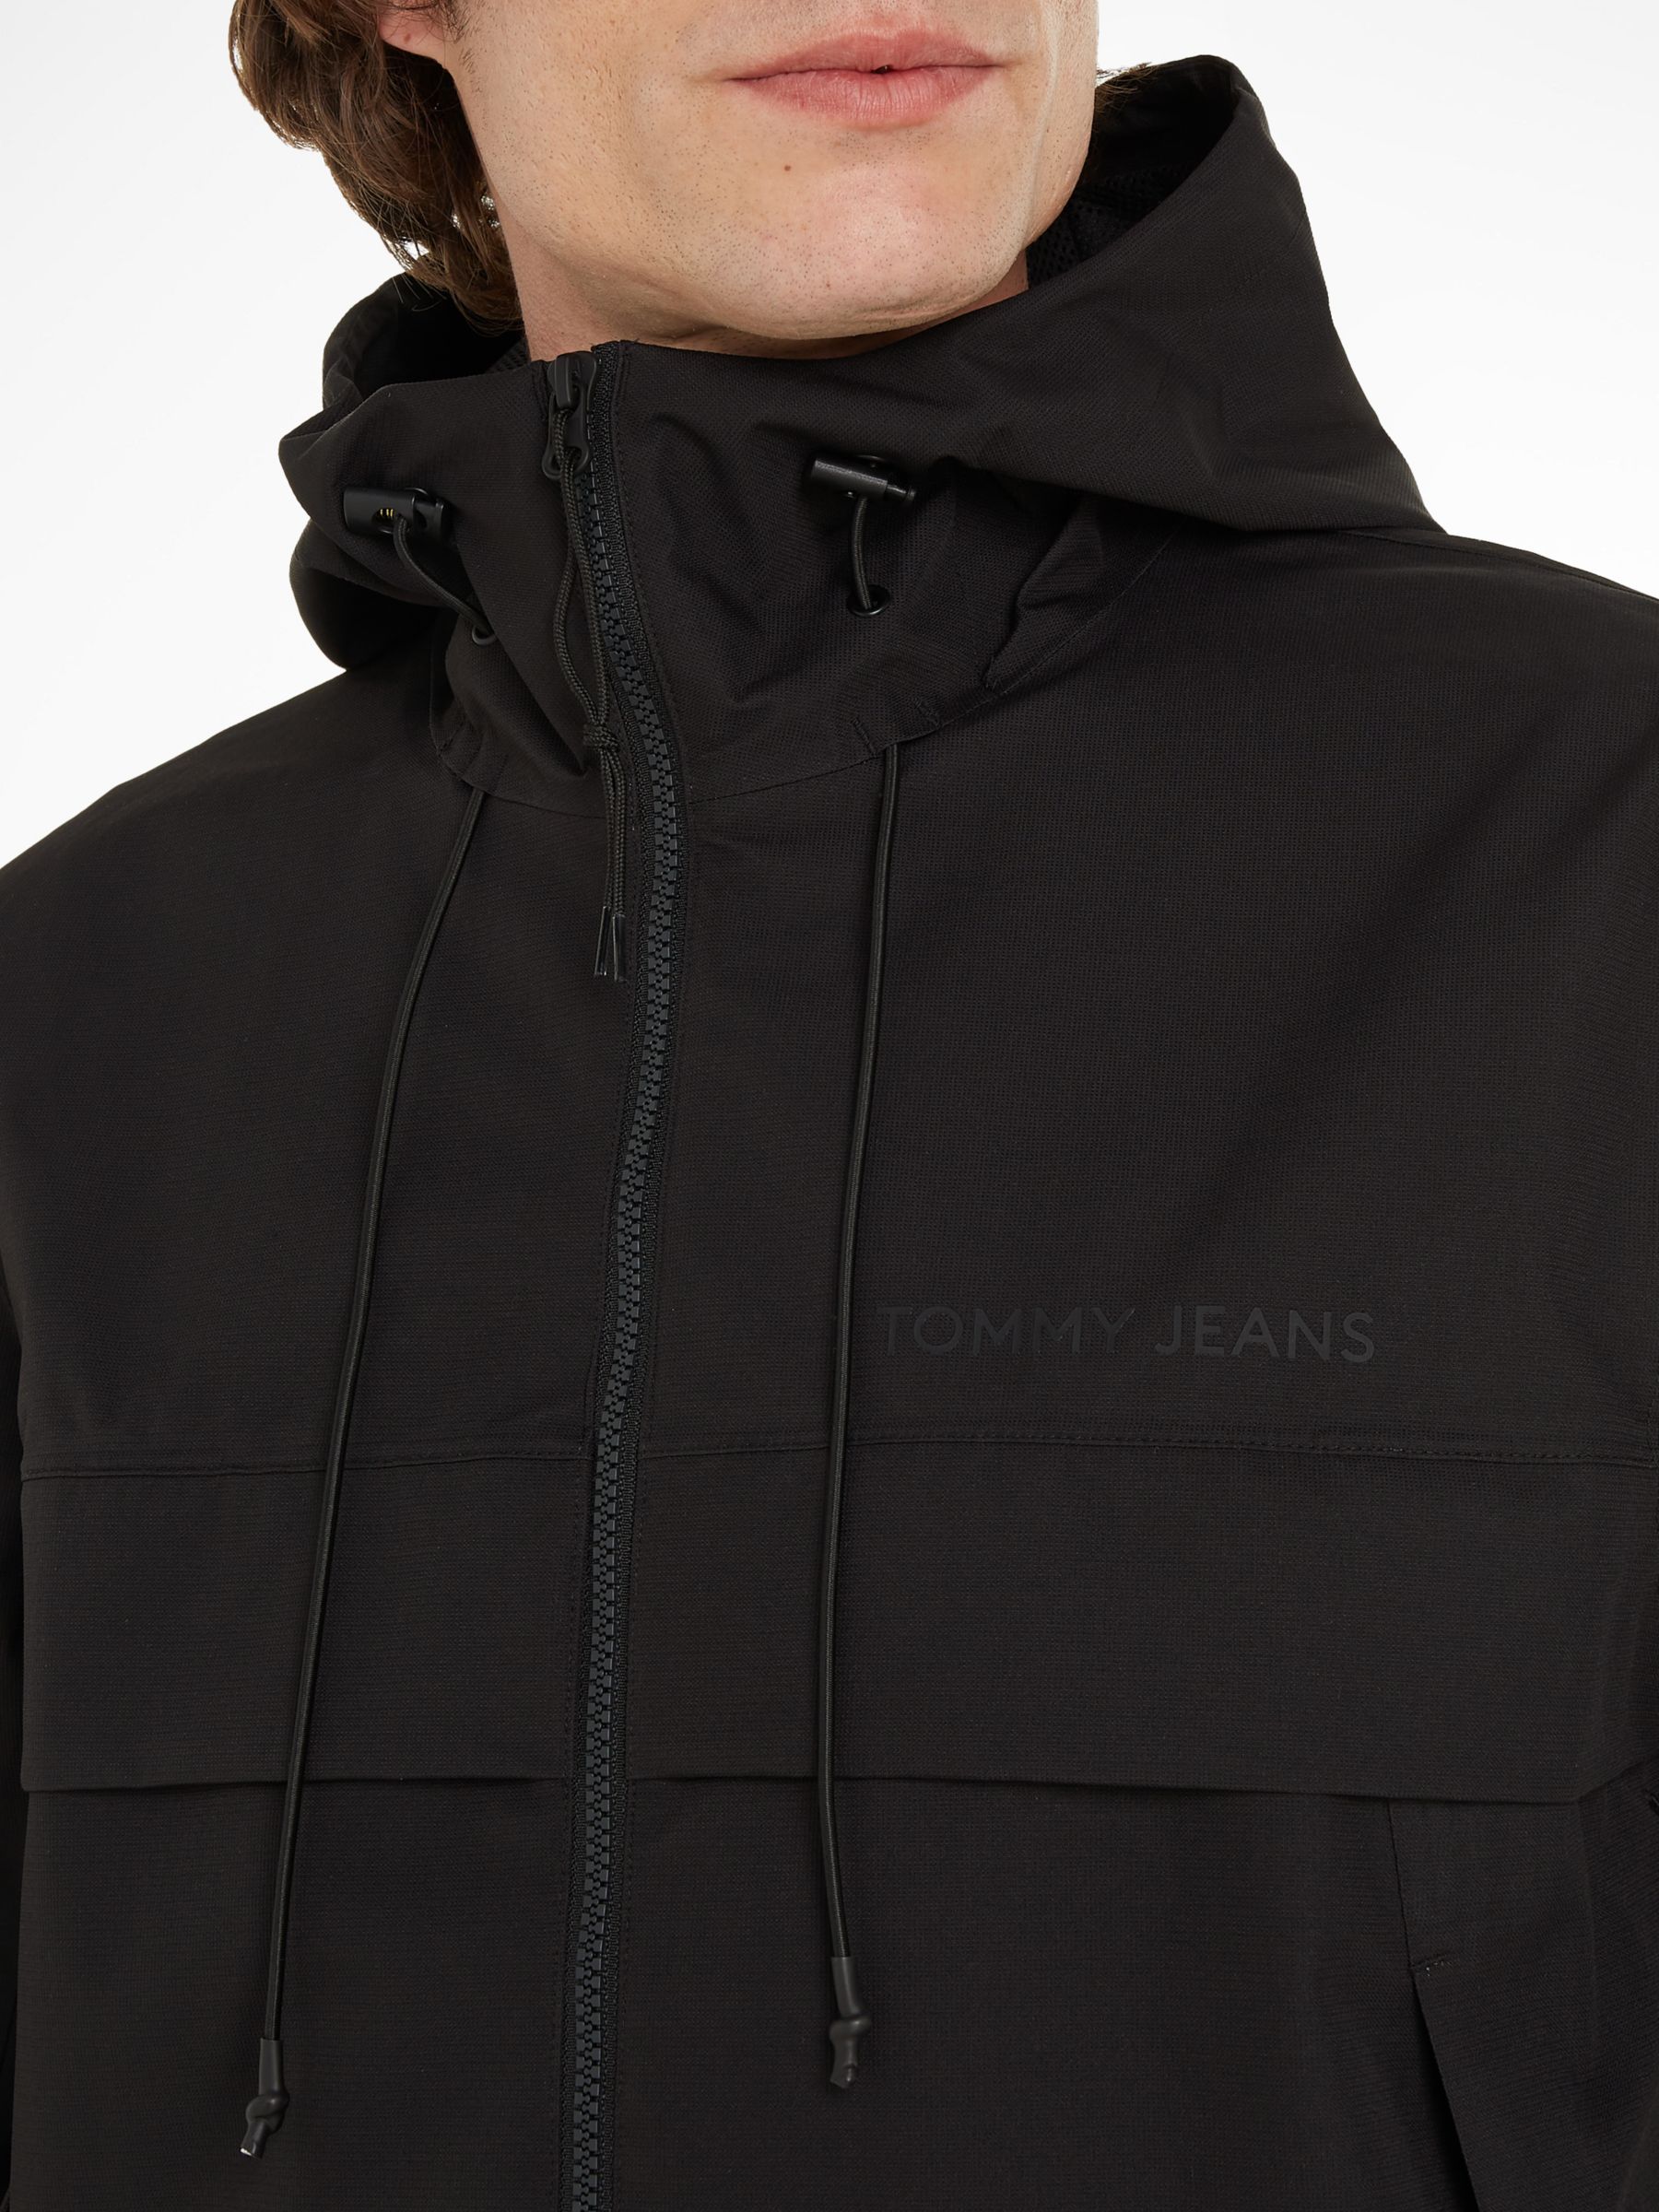 Tommy Jeans Tech Outdoor Chicago Jacket, Black at John Lewis & Partners